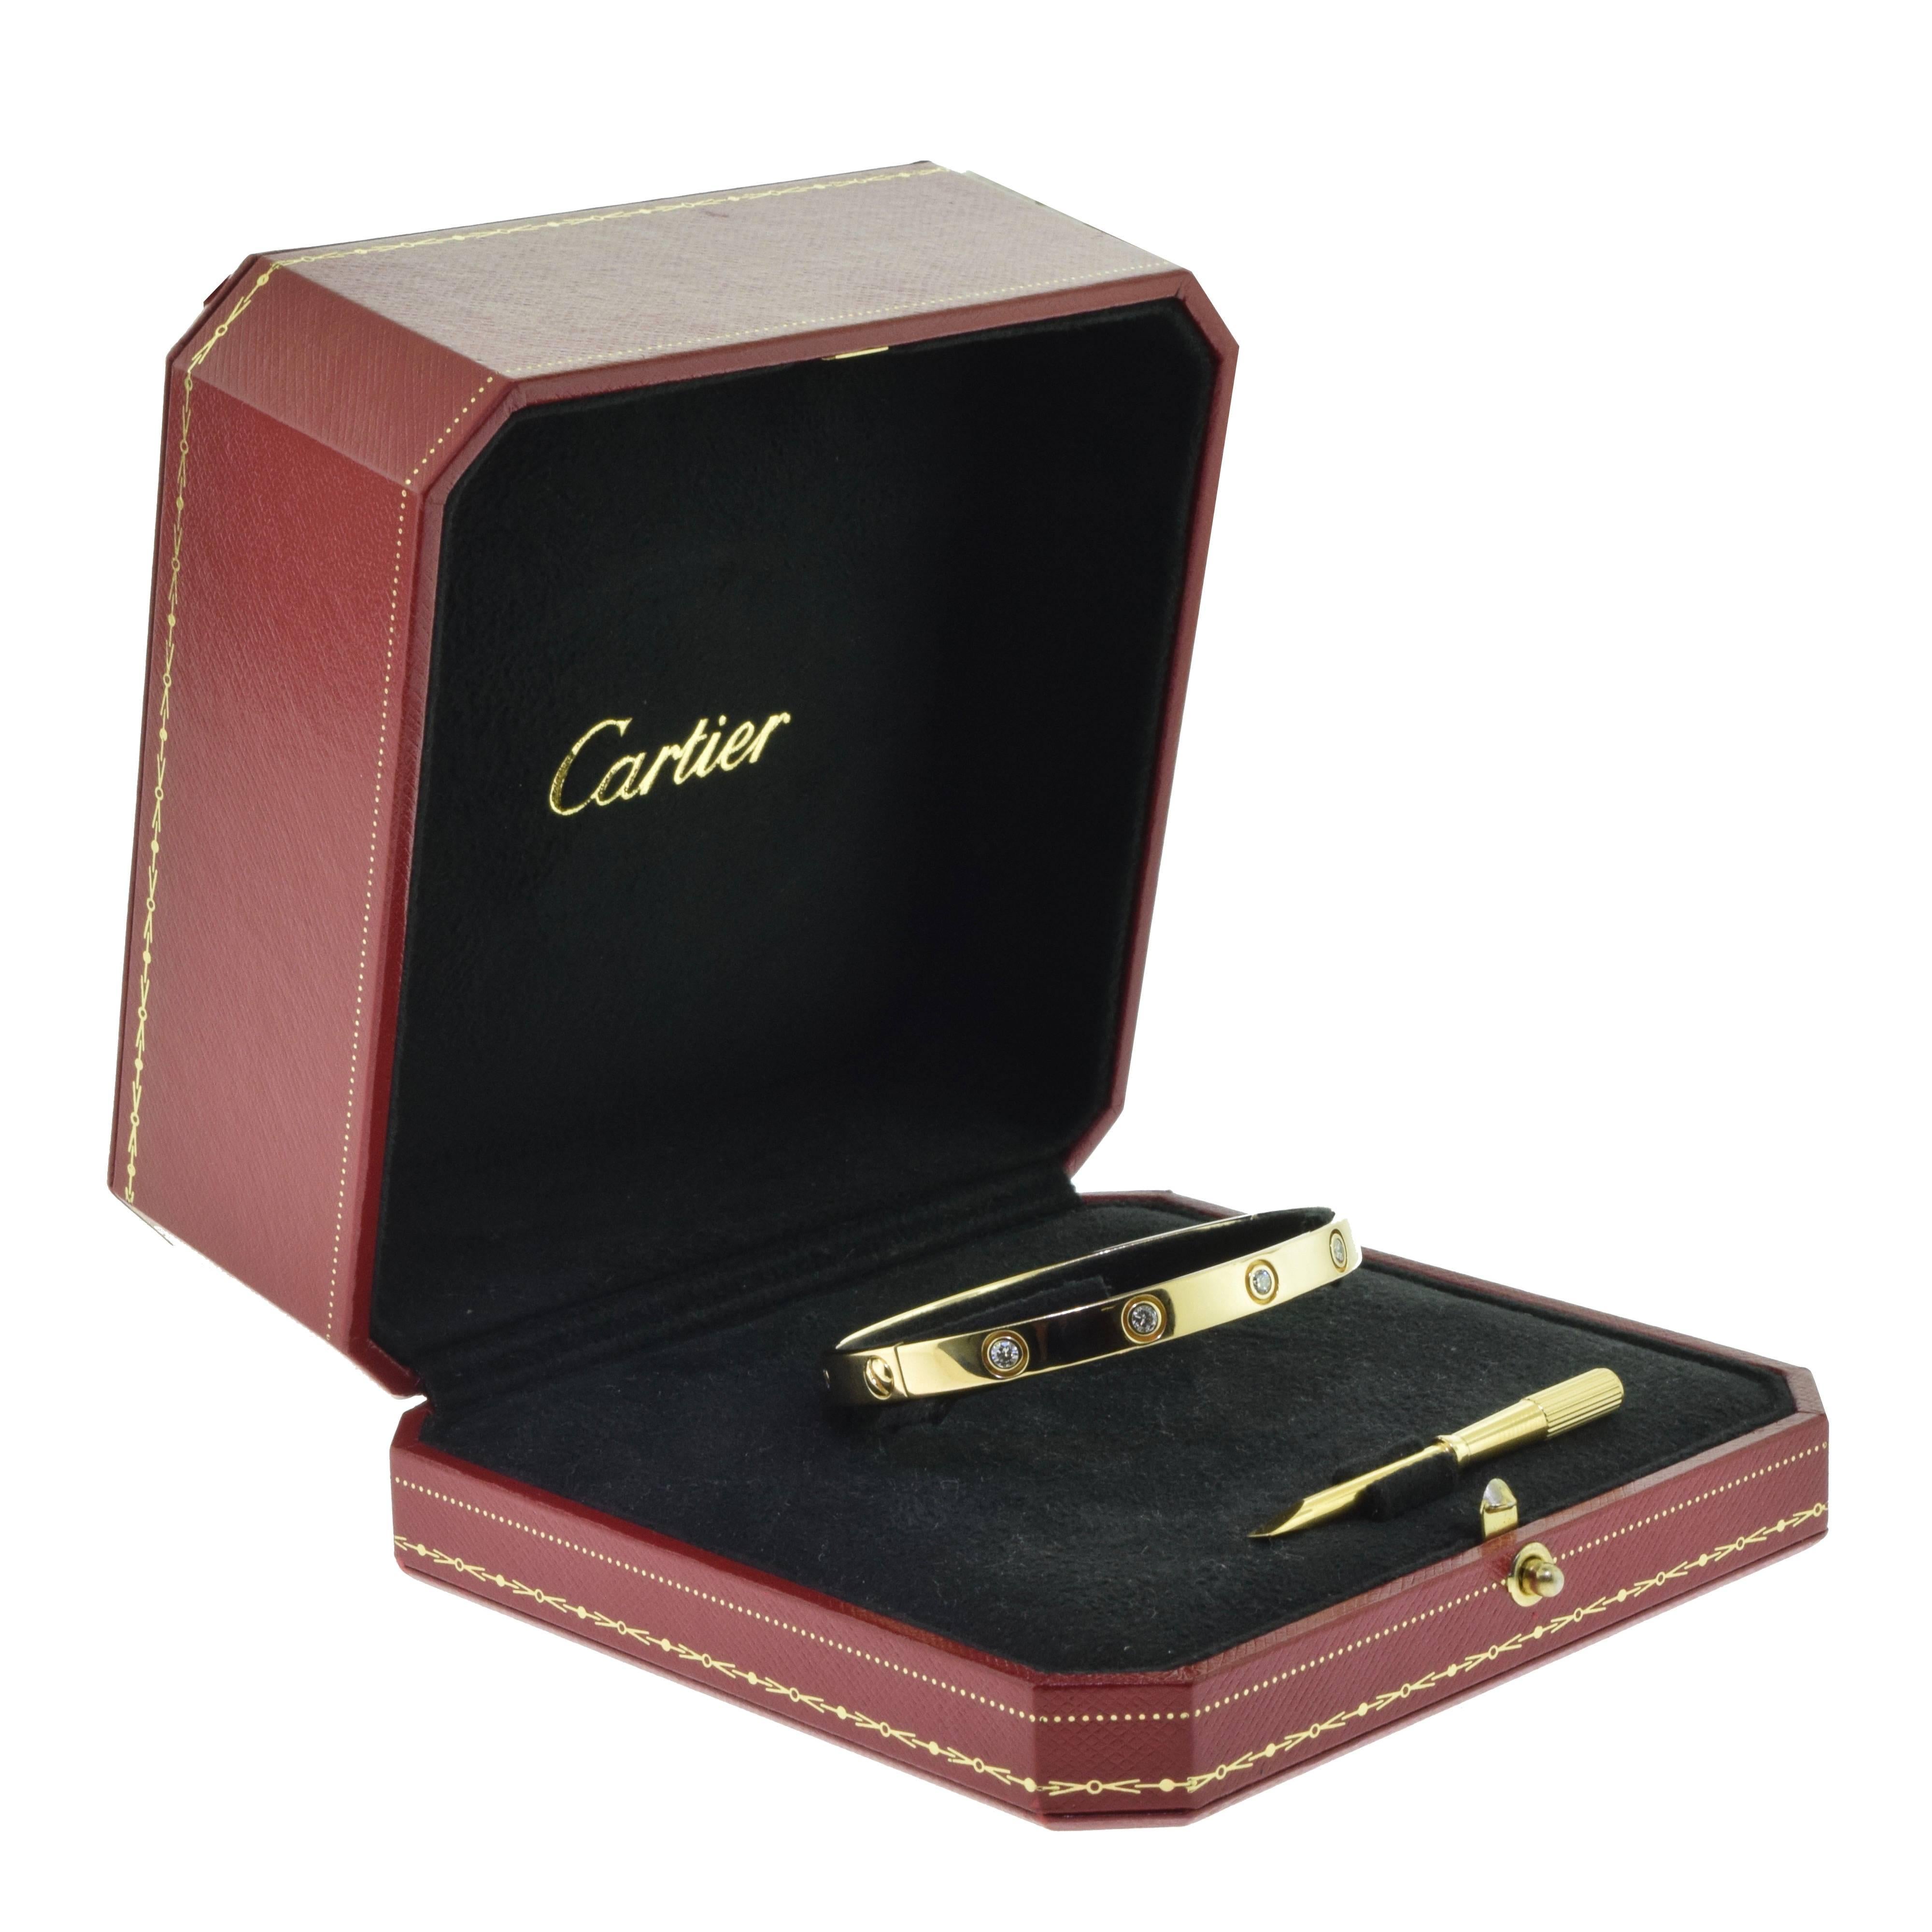 From Cartier's LOVE Collection
Bracelet Size: 18 = 18 cm
Metal: 18 Karat Yellow Gold
Stones: 10 Round Brilliant Cut Diamonds
Total Carat Weight: 0.96 ct
​​​​​​​Total Item Weight (g): 29.8
Collateral: Certificate of Authenticity, Screwdriver, Box